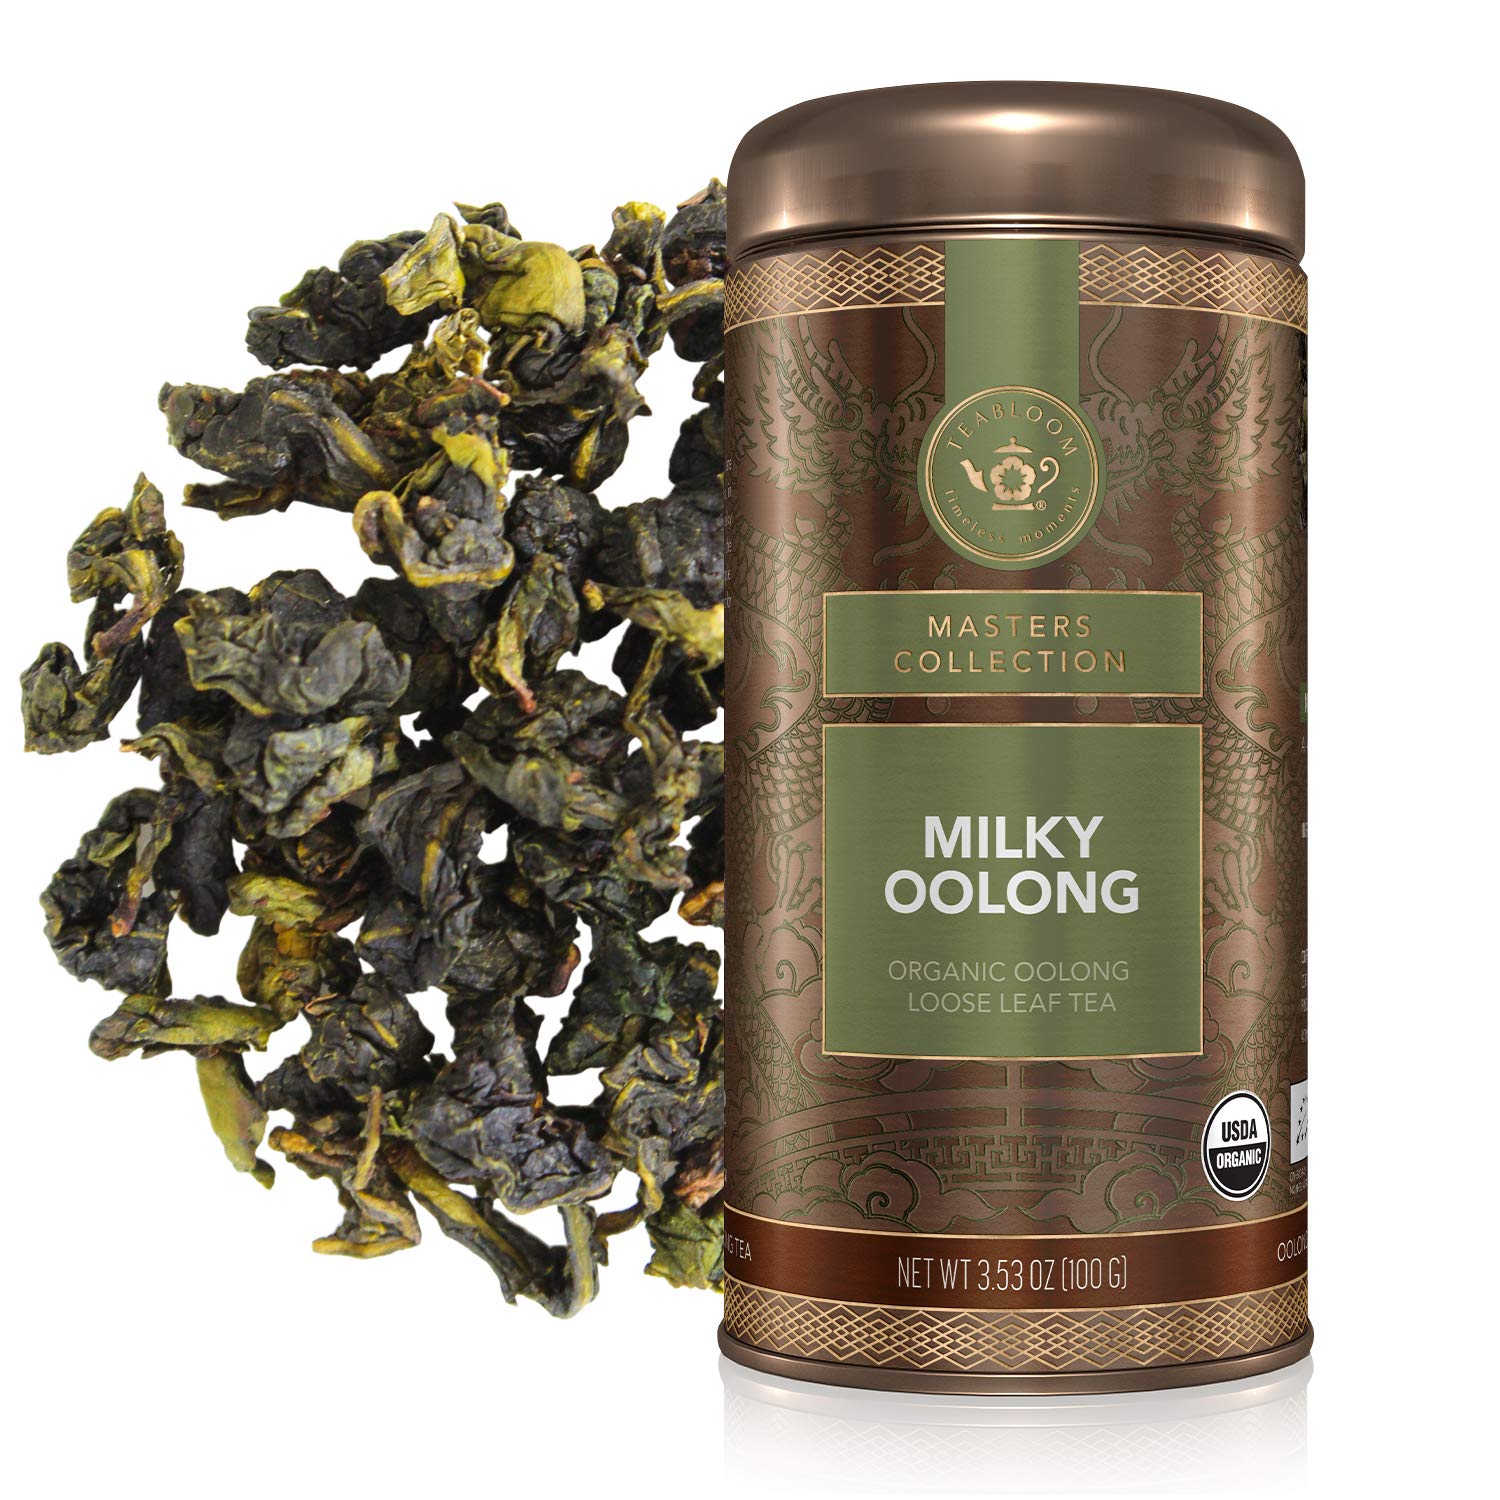 Teabloom Organic Oolong Tea, Milky Oolong Loose Leaf Tea, Rolled Leaves Famous for its Milky Taste and Silky Texture, USDA Organic, Rare Single-Origin Tea in Reusable Gift Canister, 3.53 oz/100 g Canister Makes 35-50 Cups